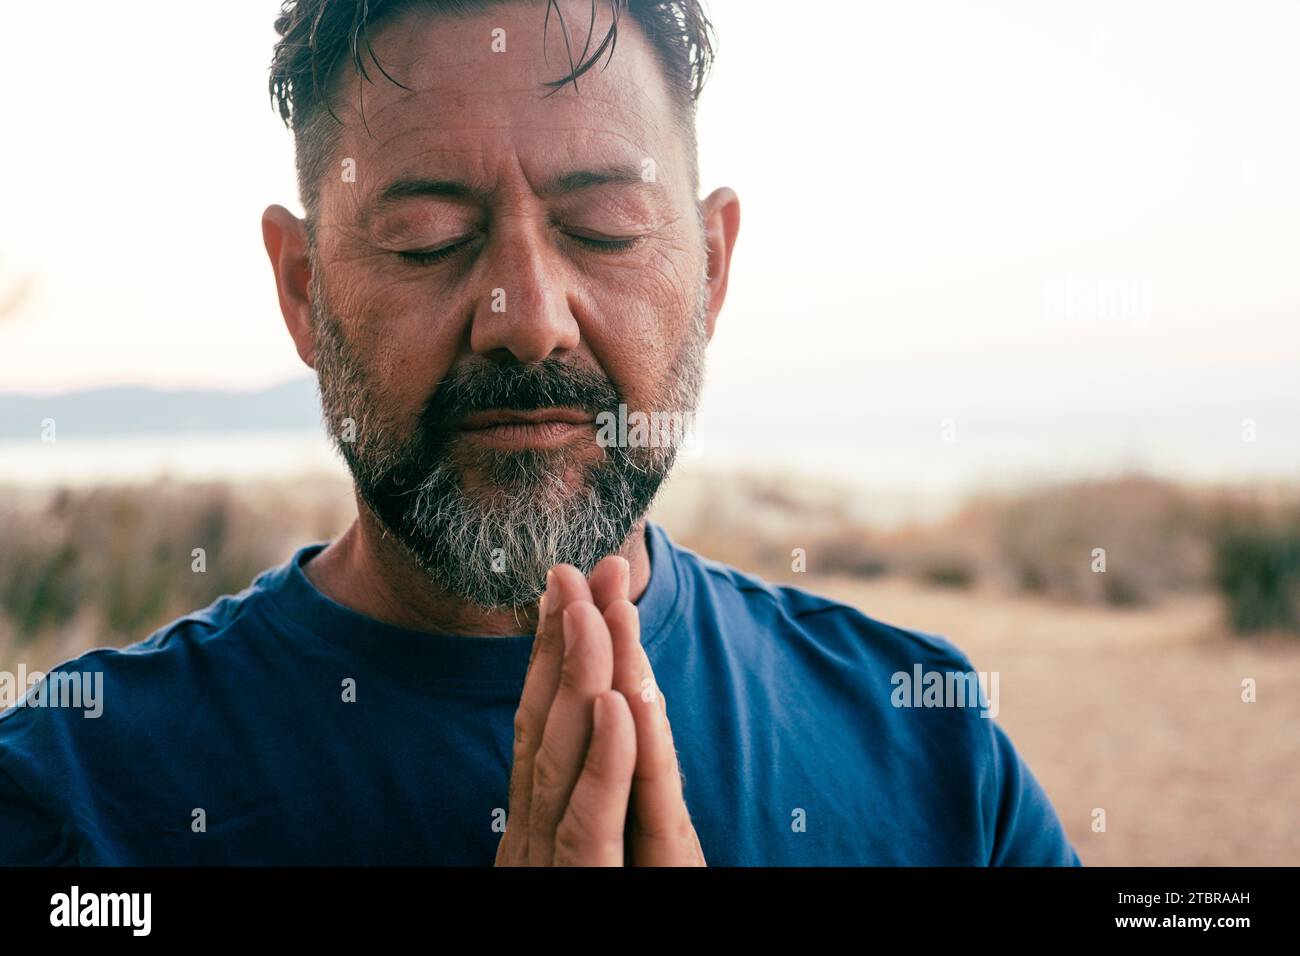 One adult man praying and meditate outdoor in relaxation gesture with hands clasped and closed eyes portrait. Zen like healthy mental balance lifestyle male people. Wellbeing. People zen exercise Stock Photo